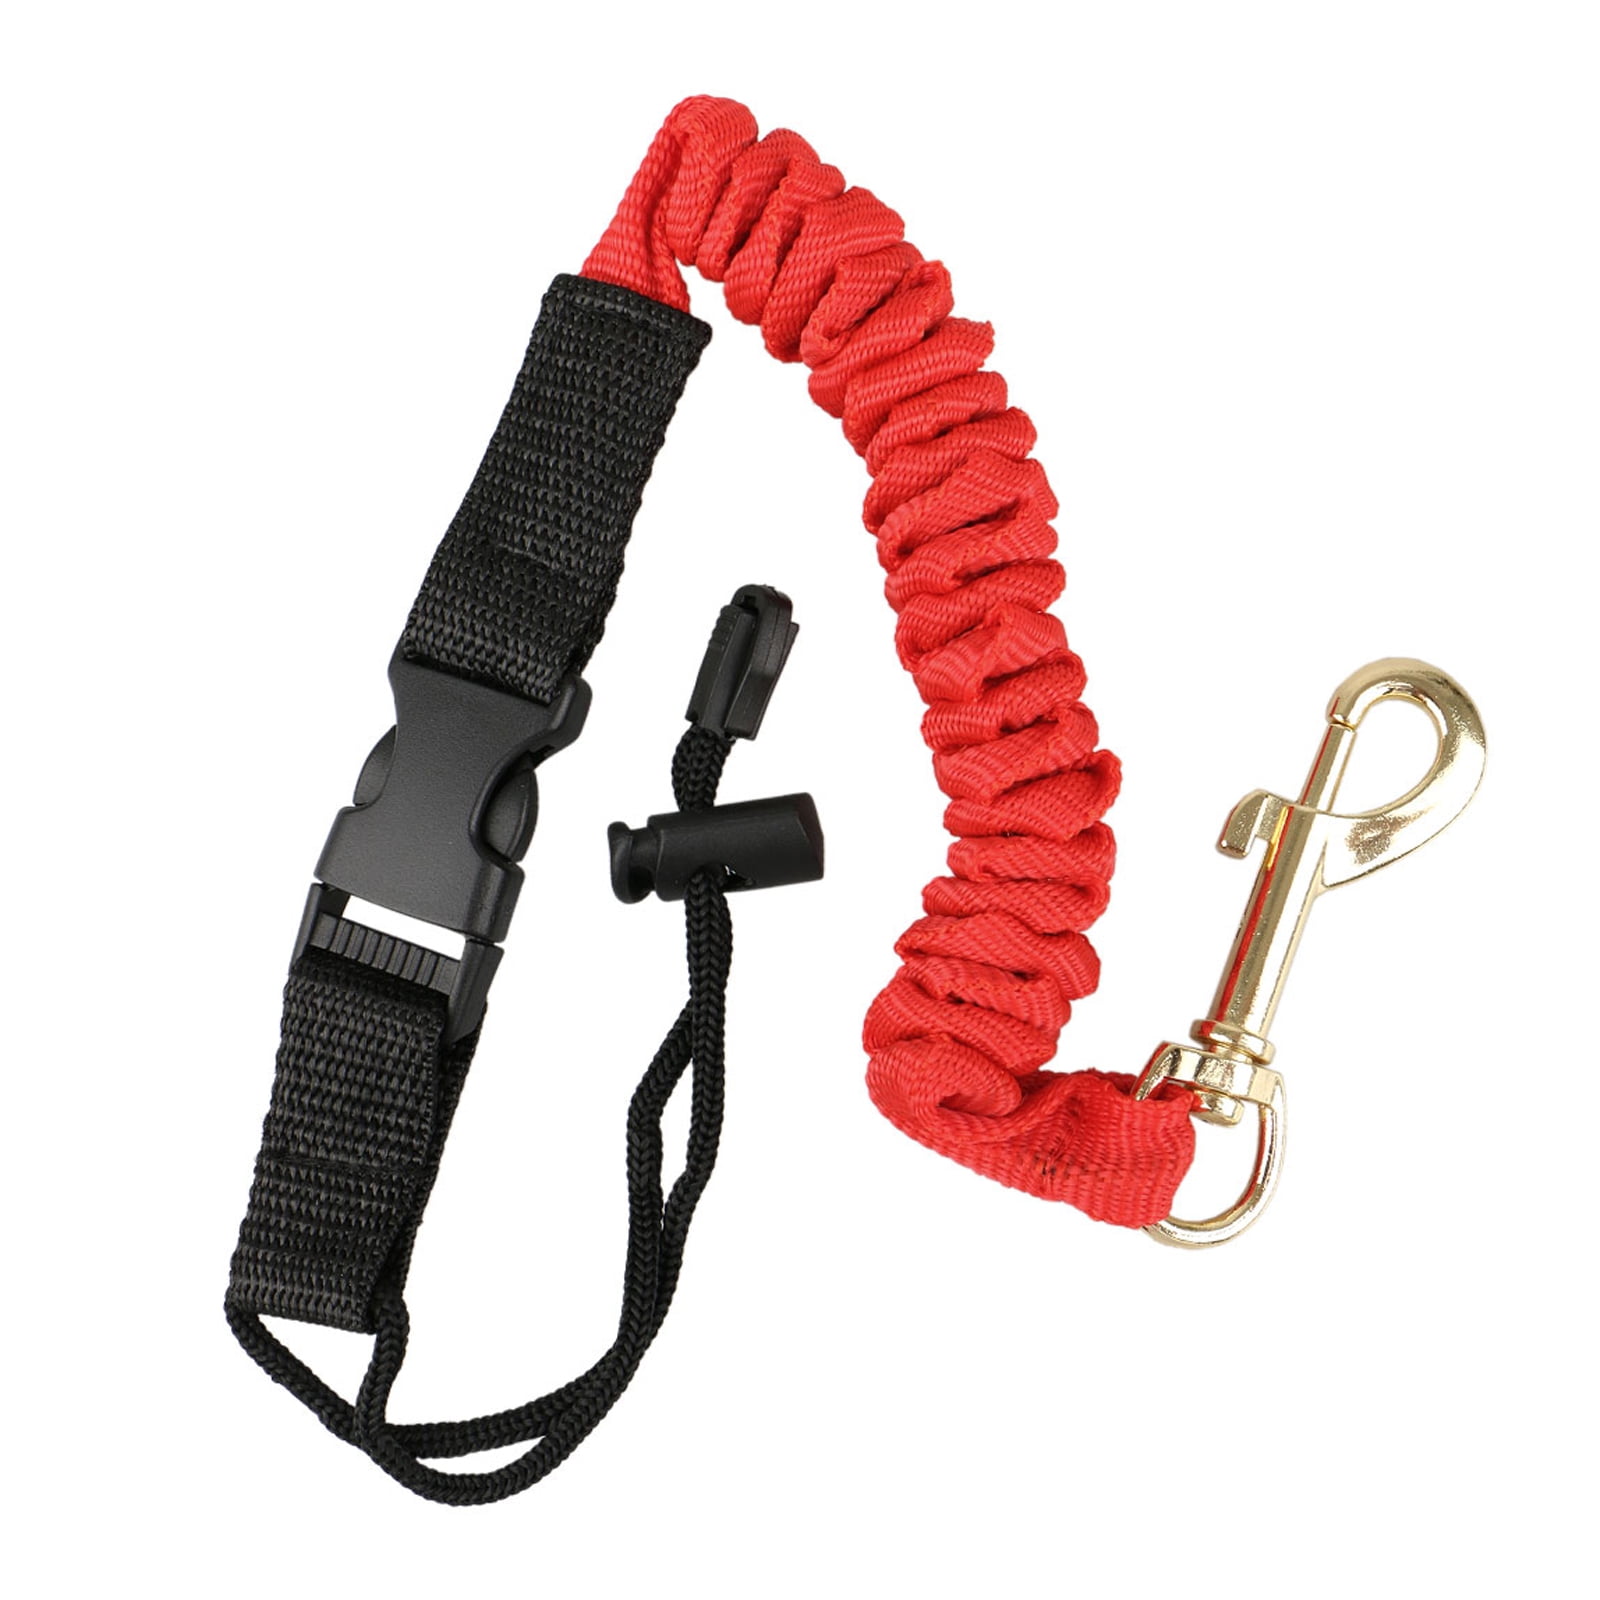 Bungee Cord HZ Durable Kayak Boat Canoe Paddle Leash Fishing Rod Coil Tether 